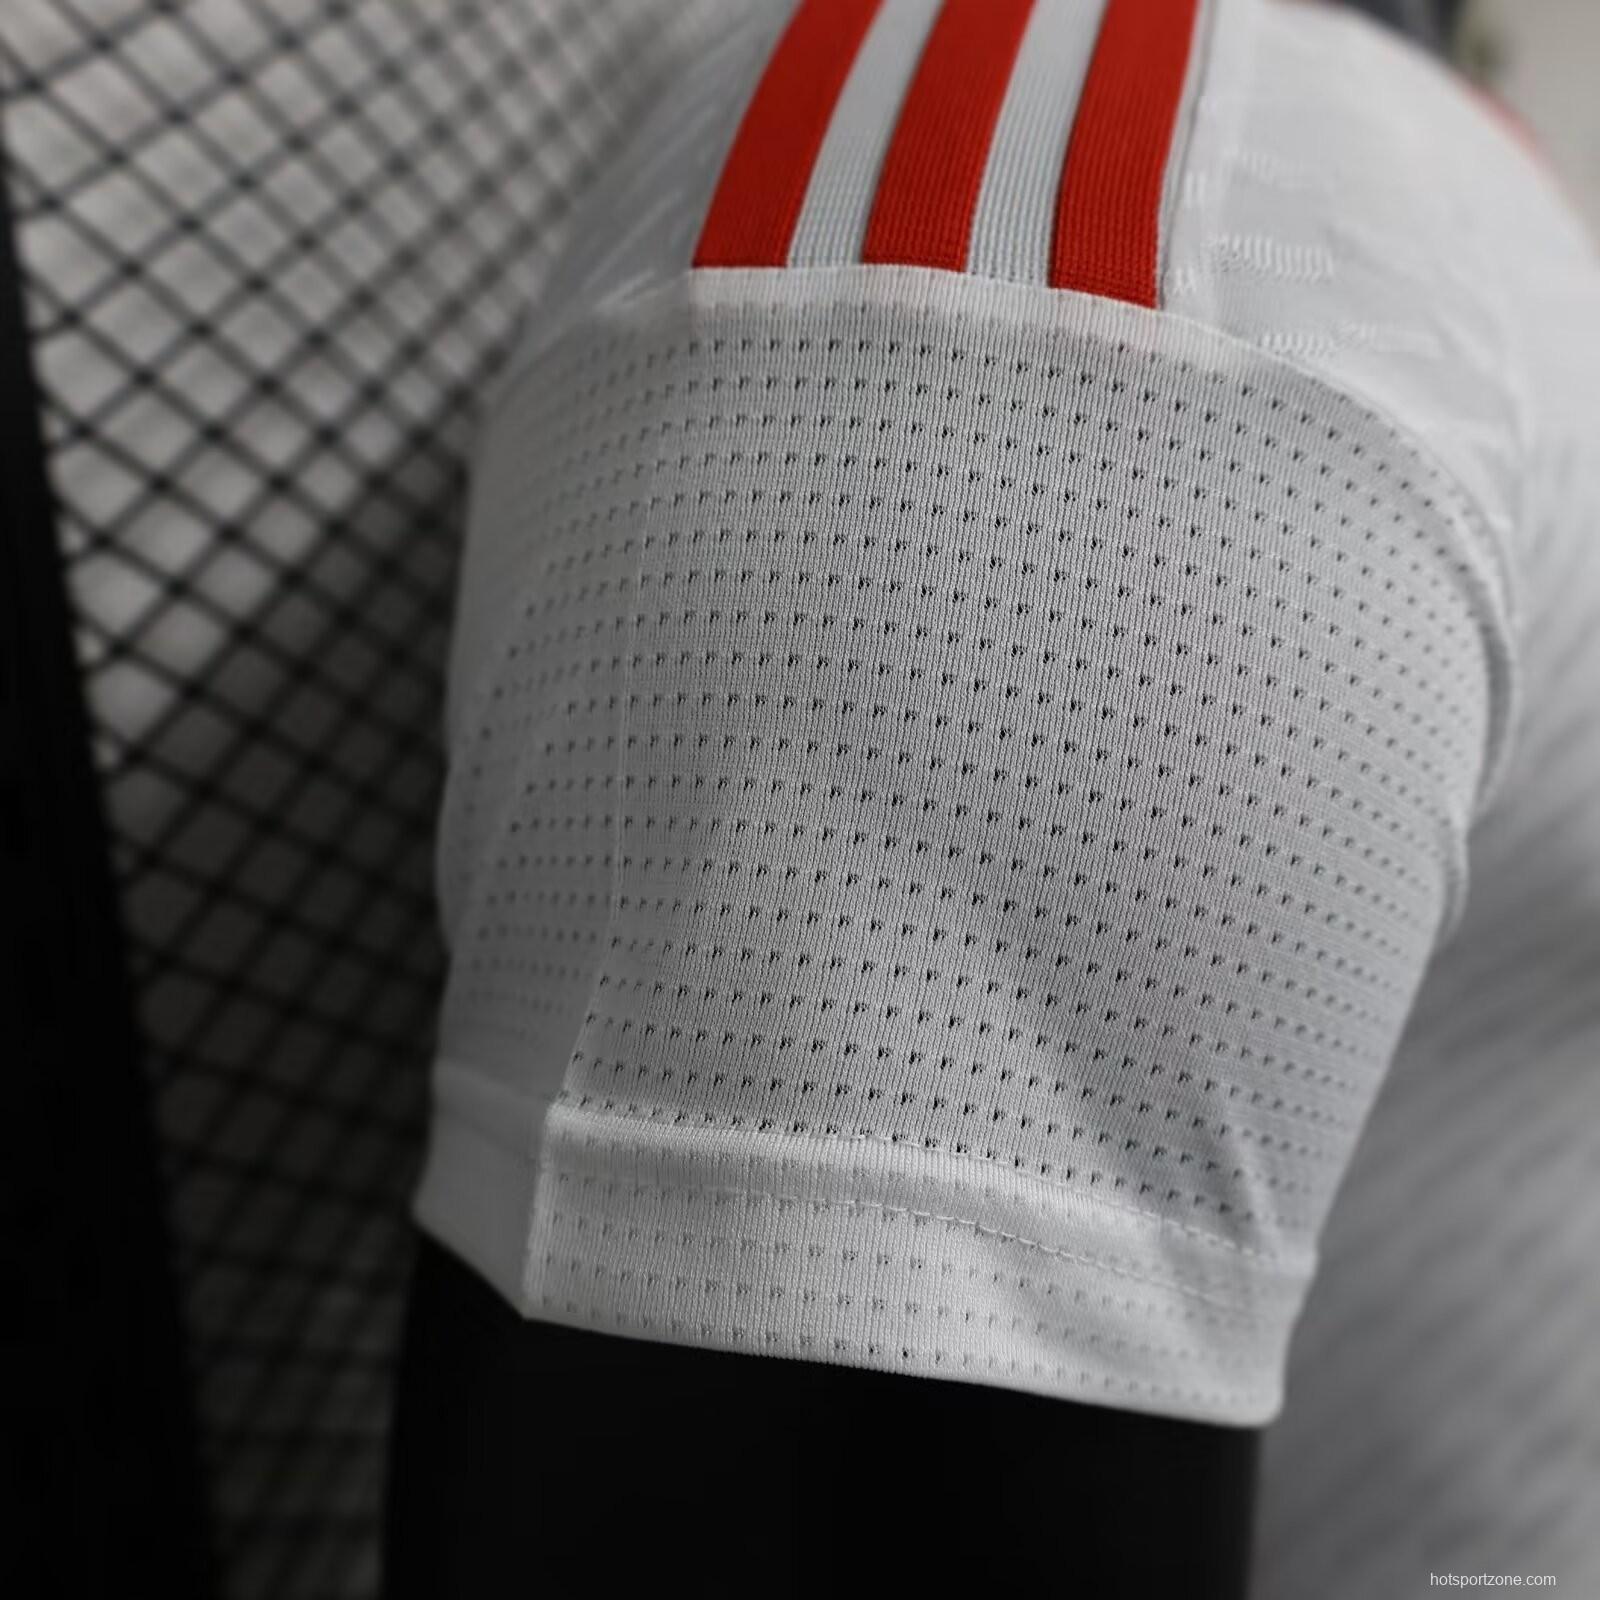 Player Version 2024 United Arab Emirates Home Jersey